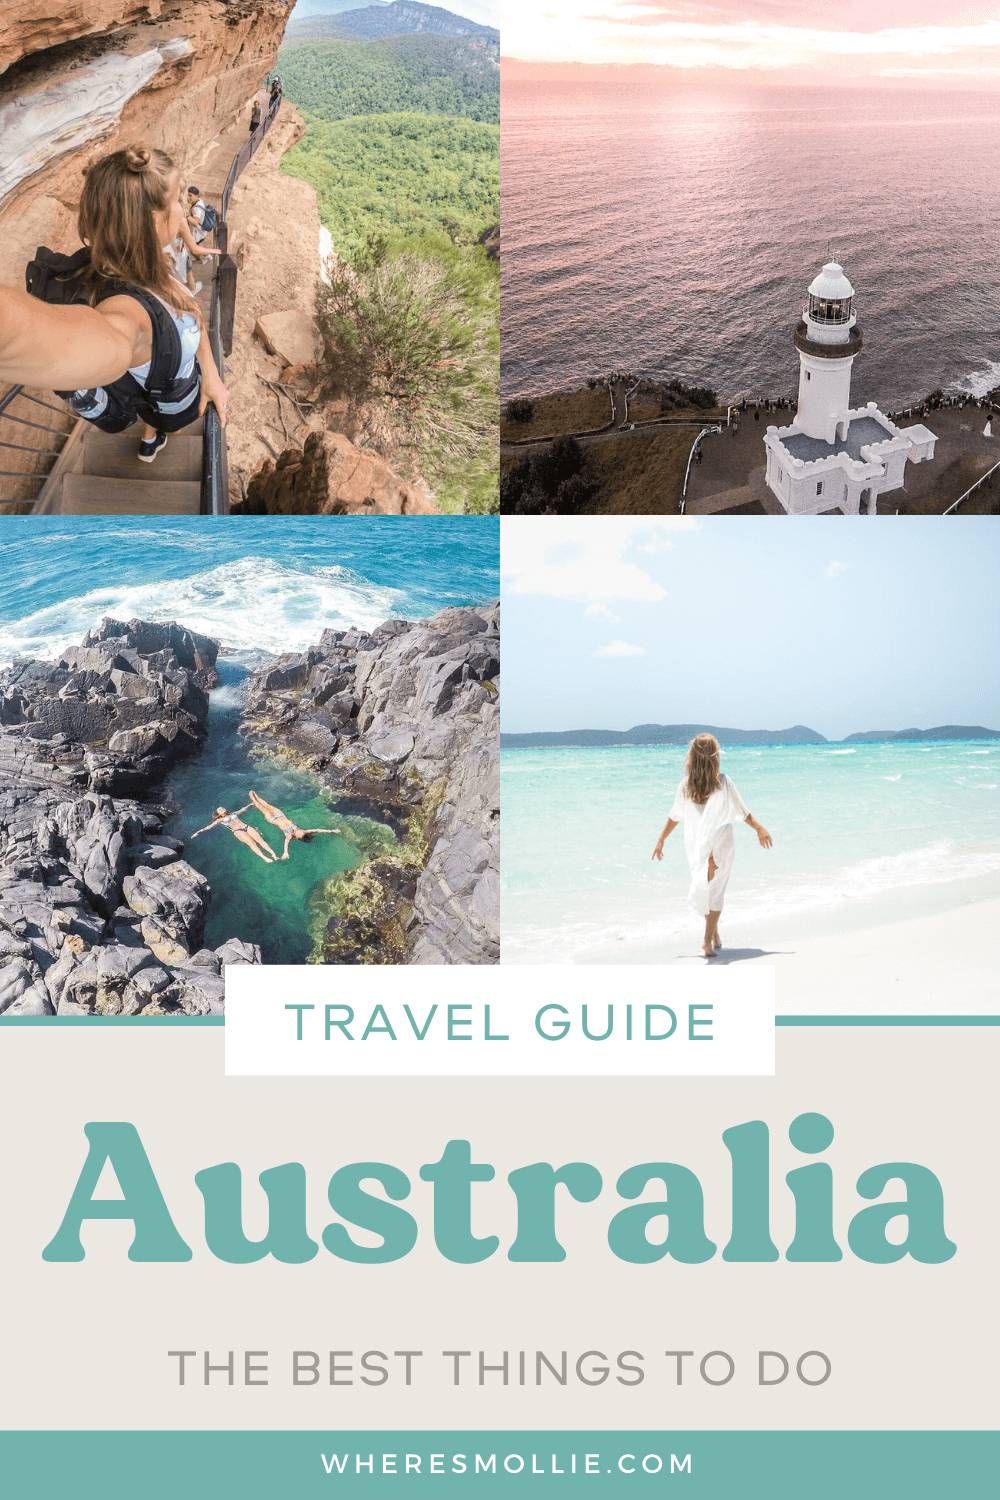 The best things to do in Australia